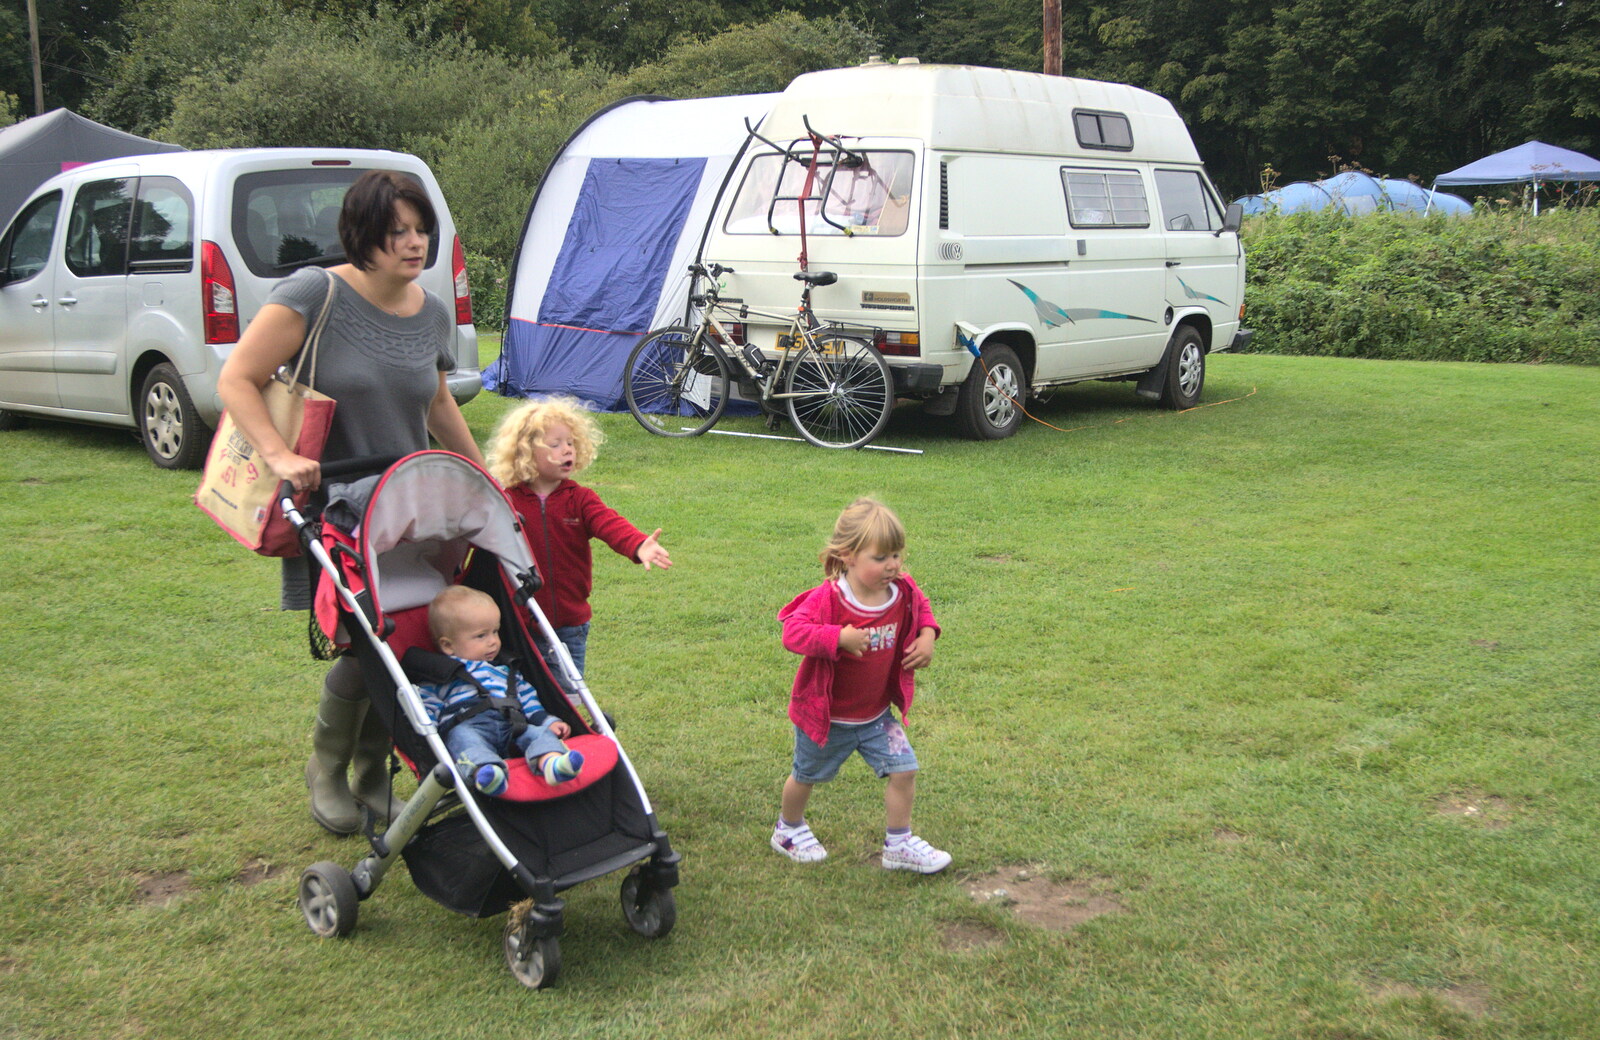 Clare, Jack and Rosie join us for a walk from Camping at Dower House, West Harling, Norfolk - 1st September 2012